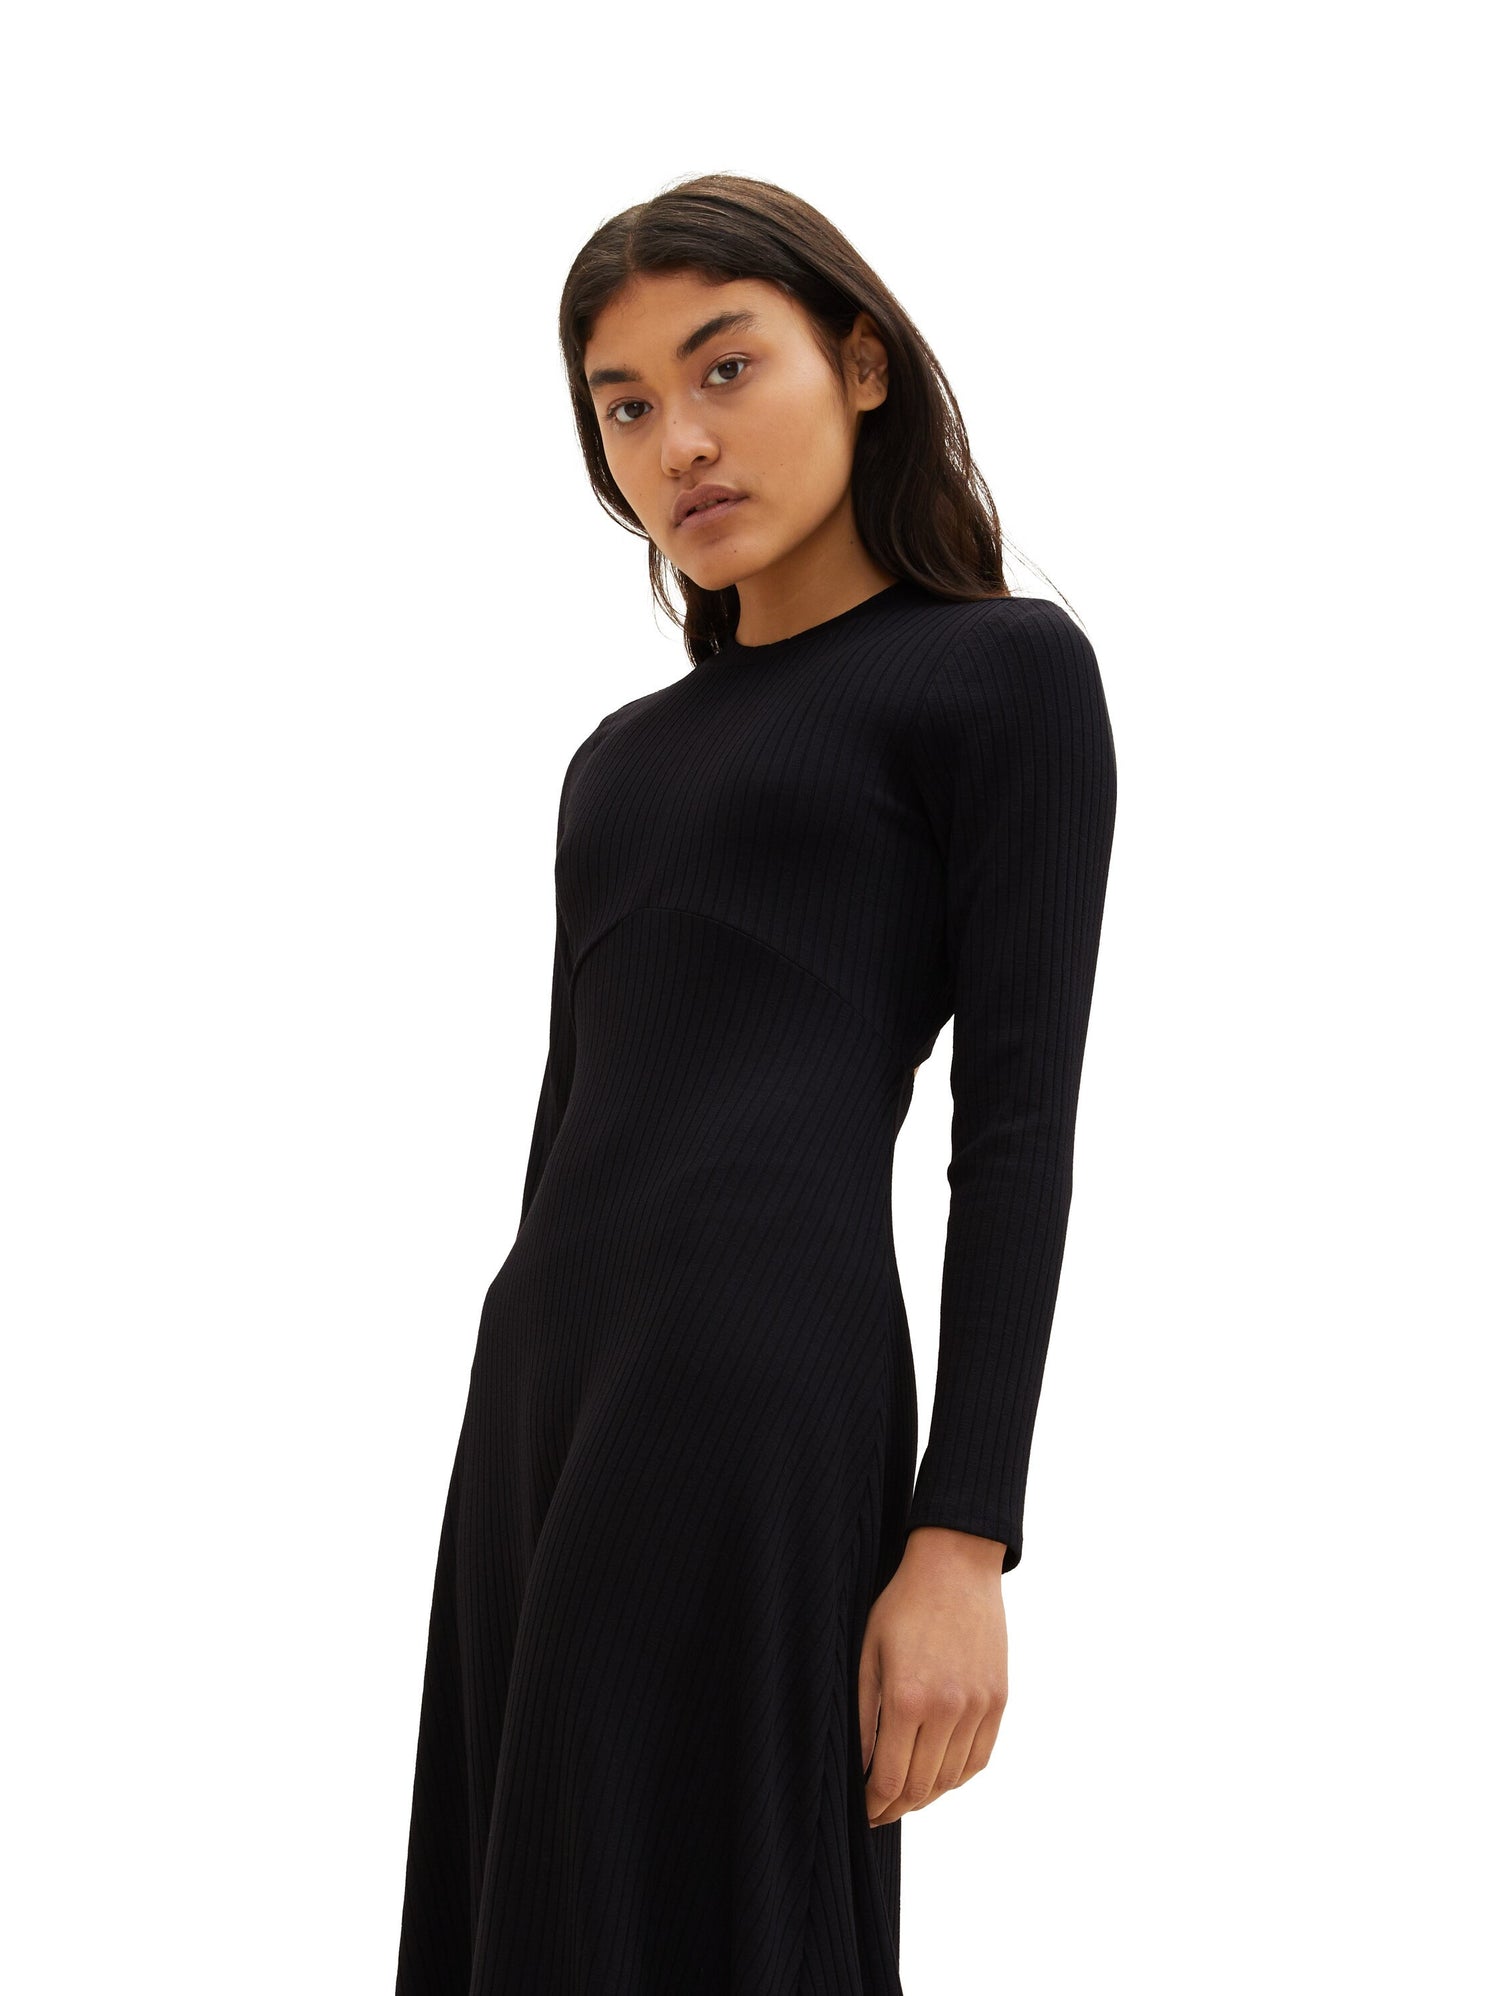 Long Sleeve Midi Dress With Back Cut Out_1038140_14482_02